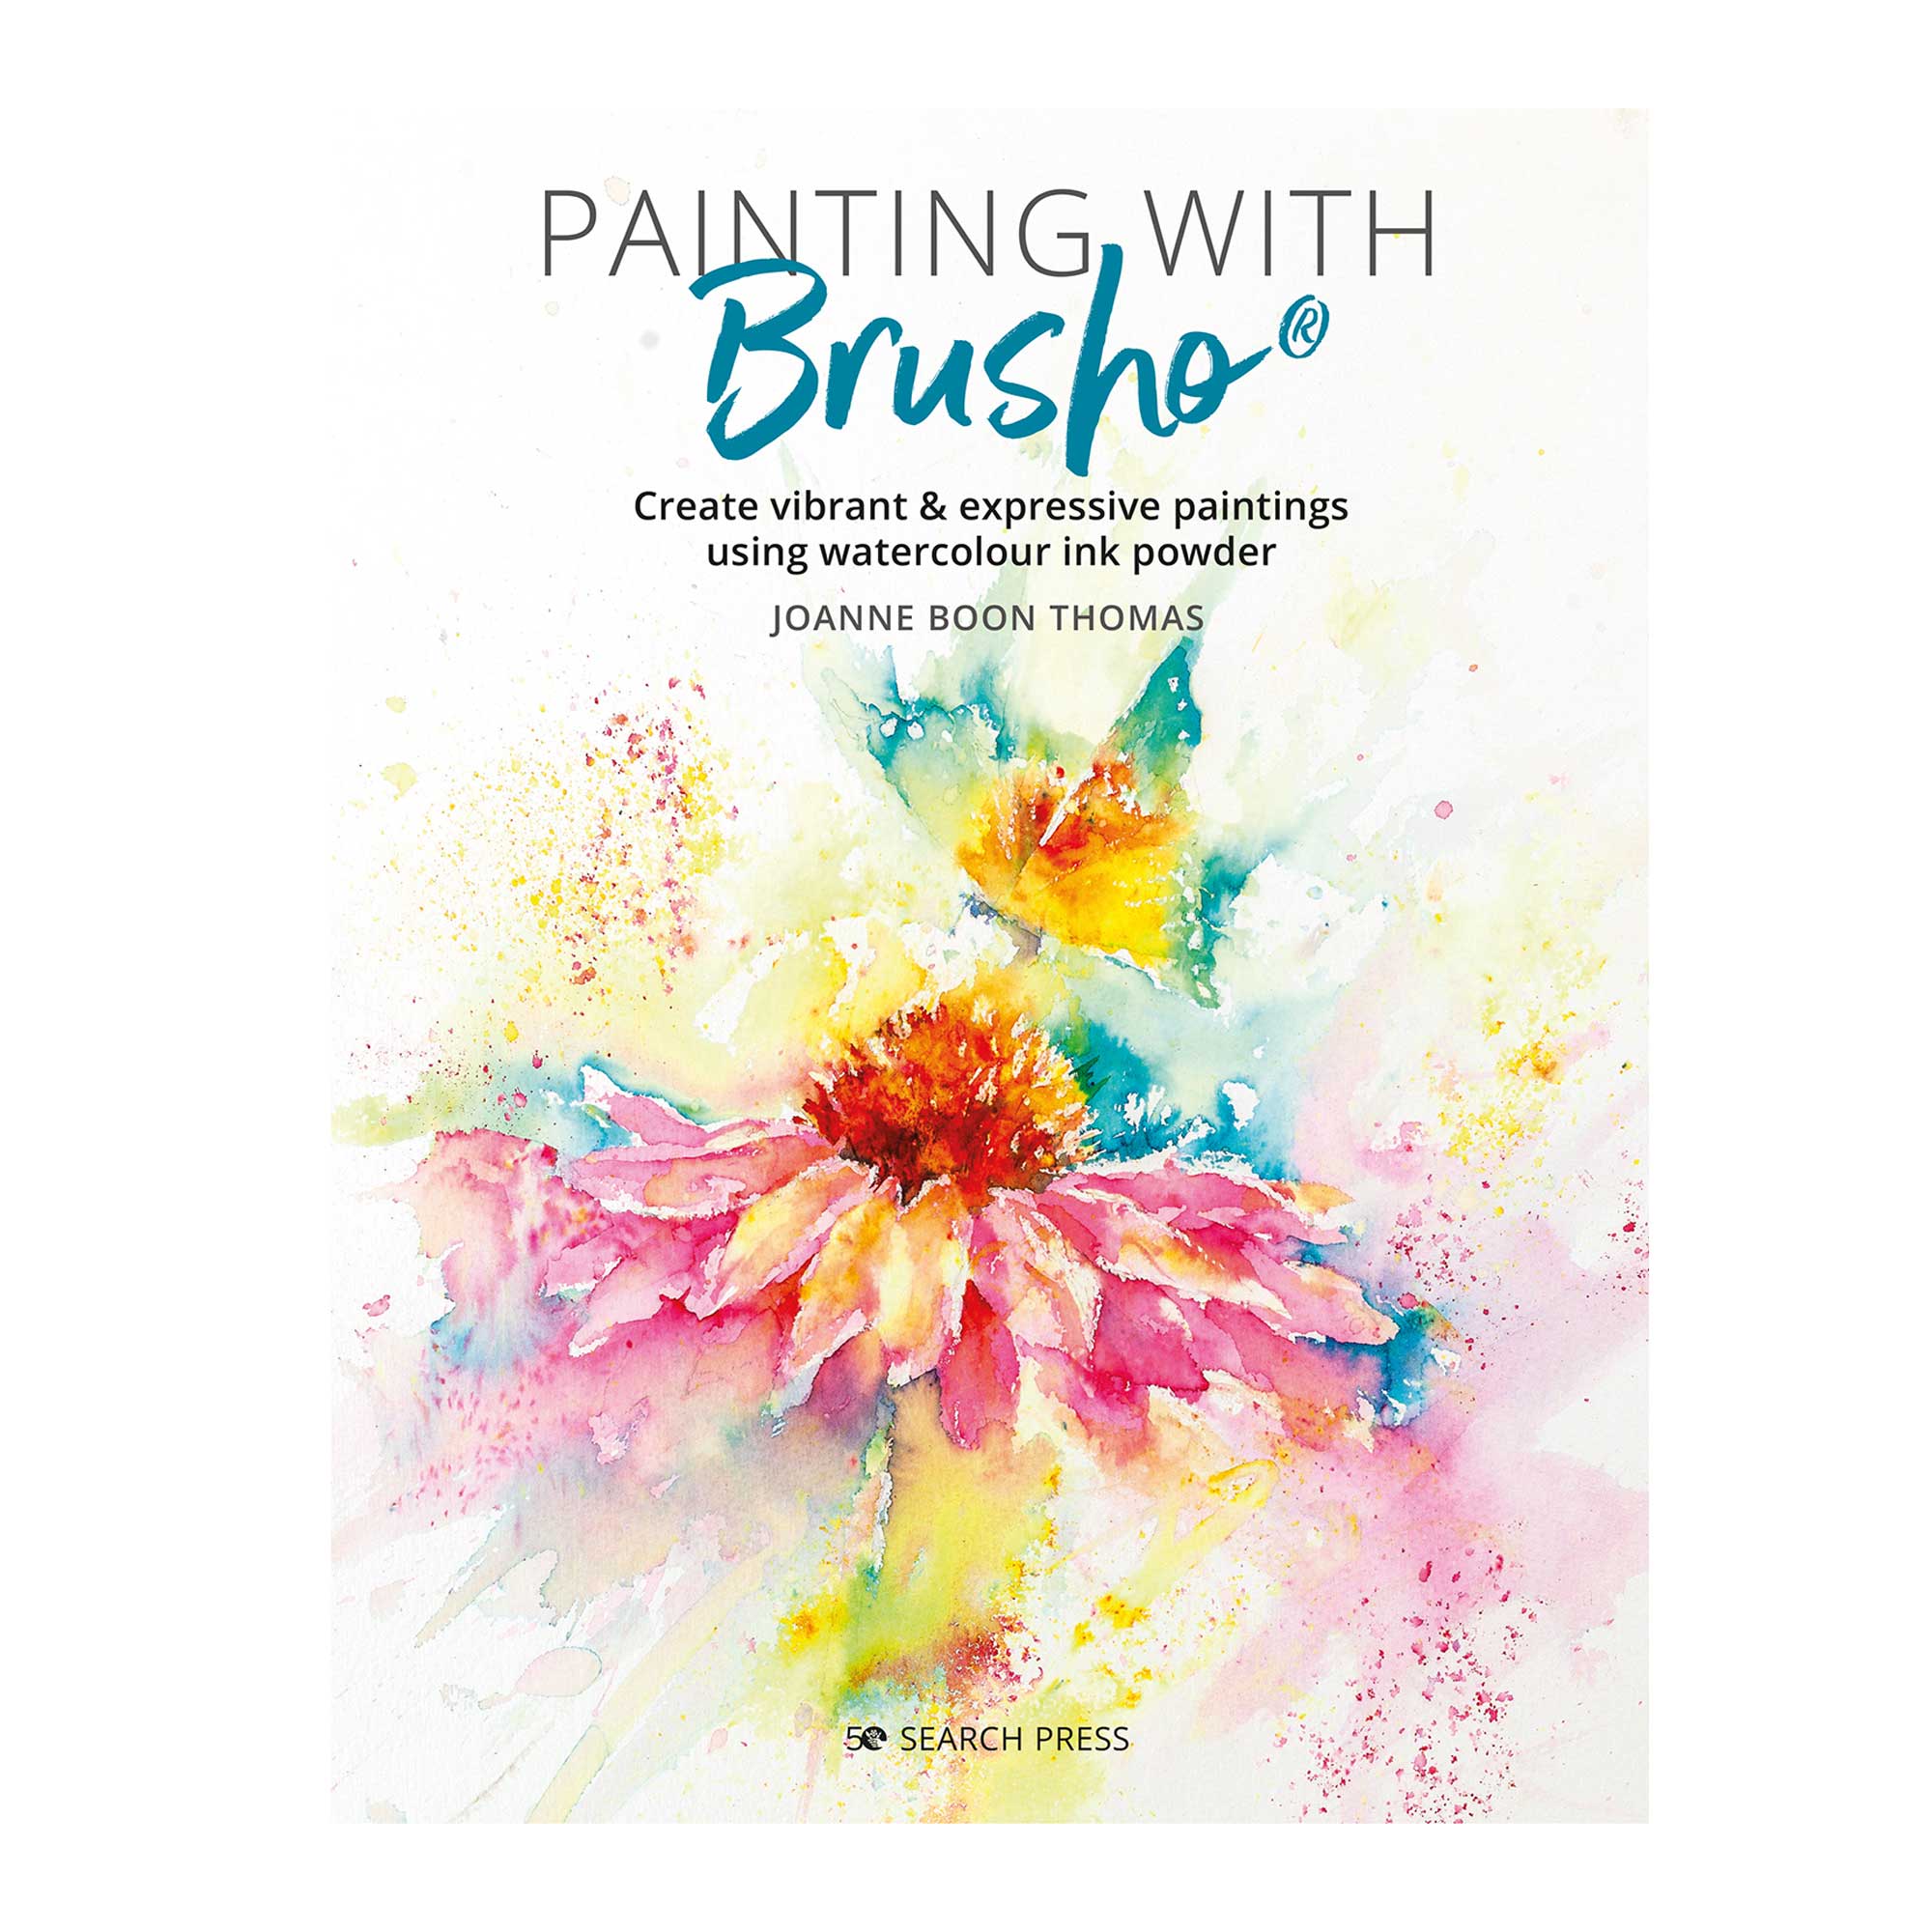 Painting with Brusho - J. Boon Thomas